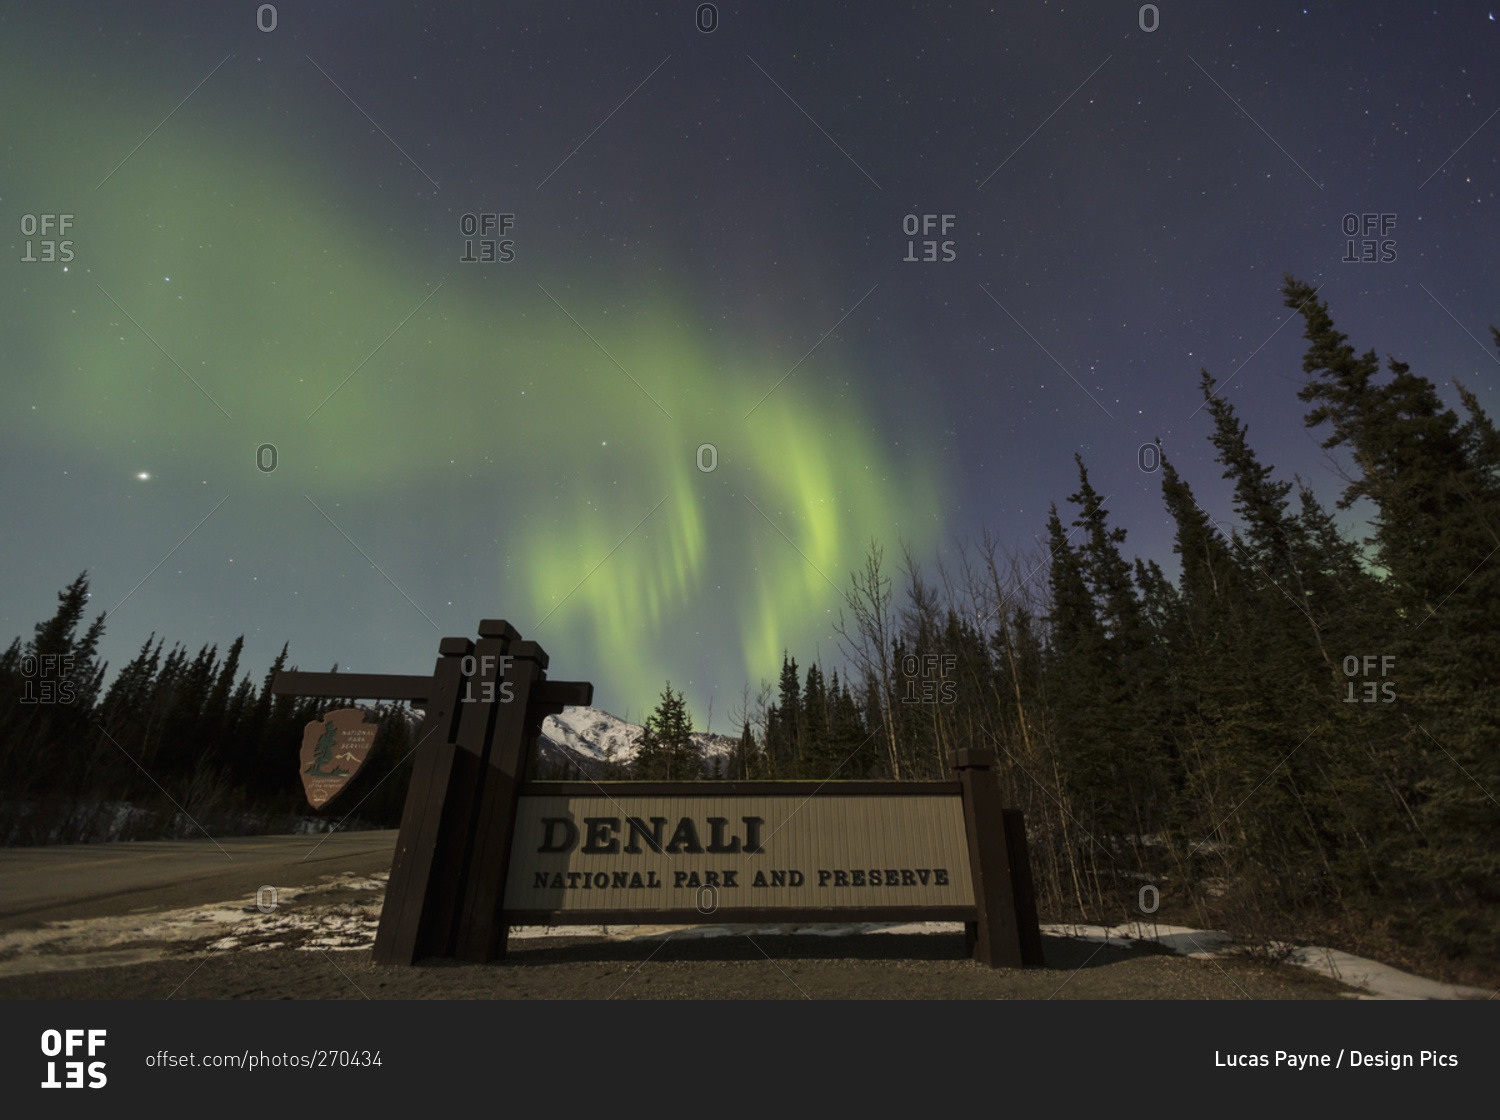 The Aurora Borealis (Northern Lights) dancing above the sign marking the entrance to Denali National Park and Preserve, Alaska, United States of America